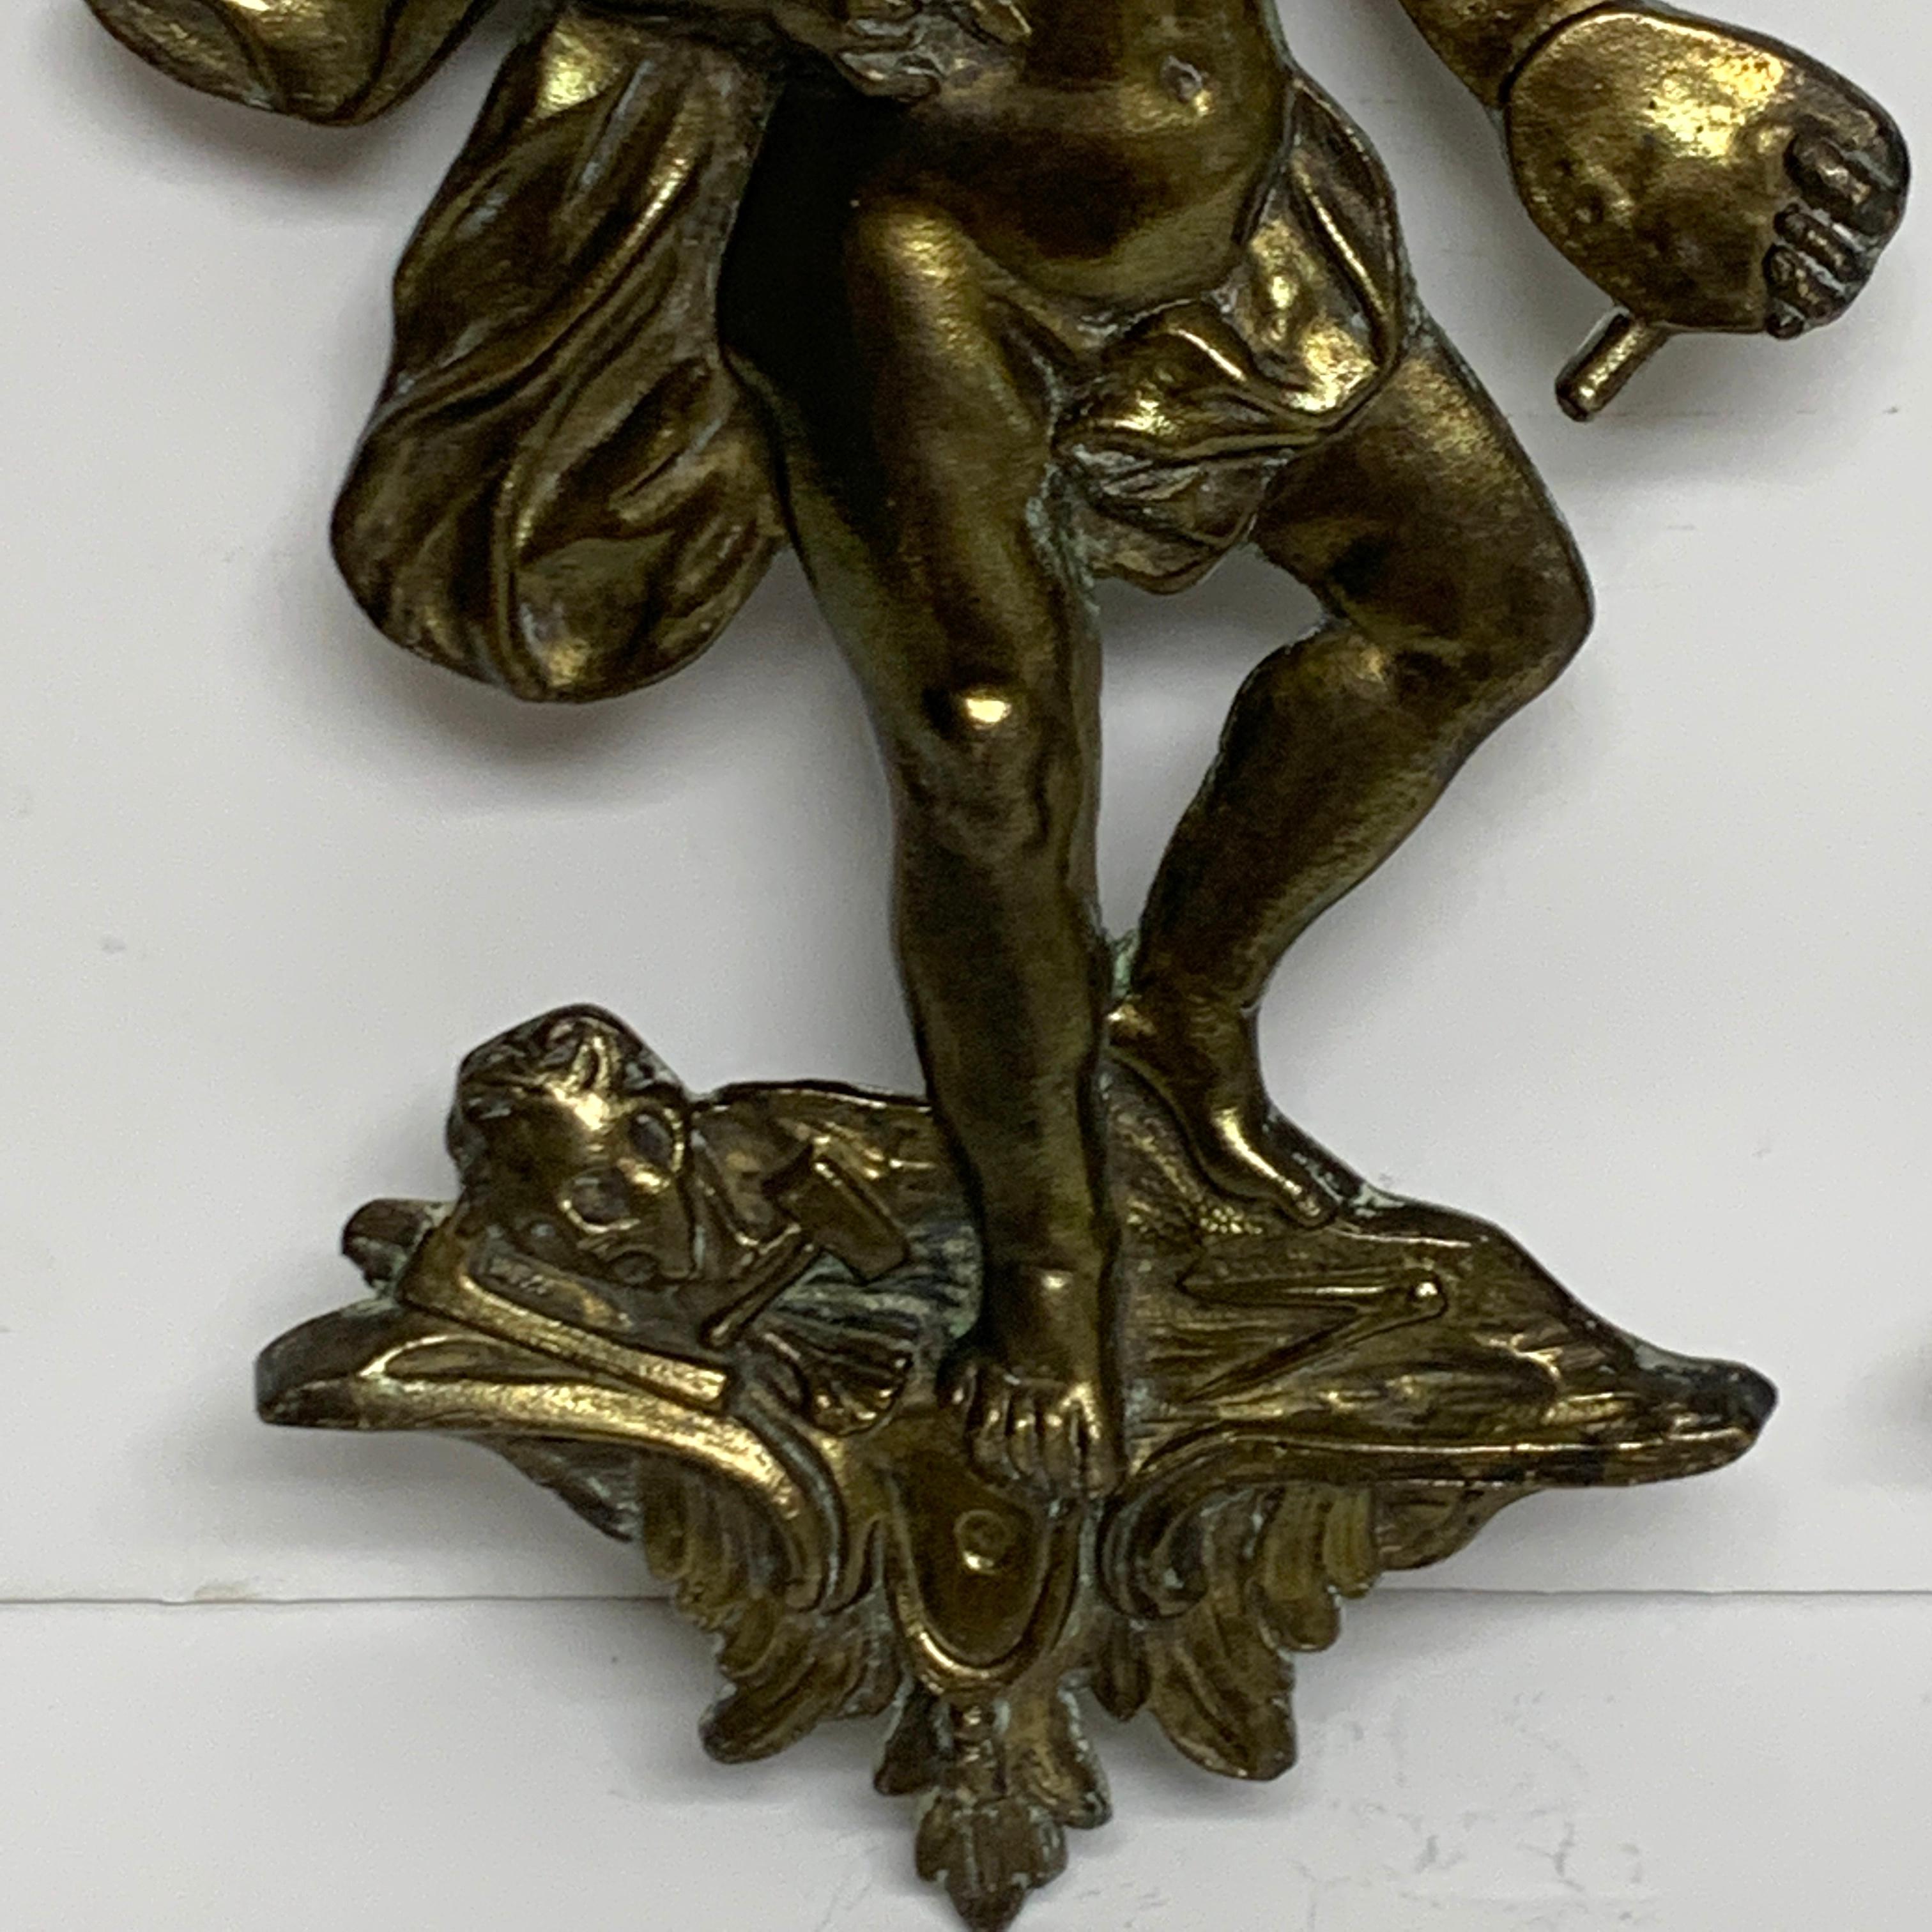 Gilt Pair of Antique French Bronze Appliqués Depicting Art and Music